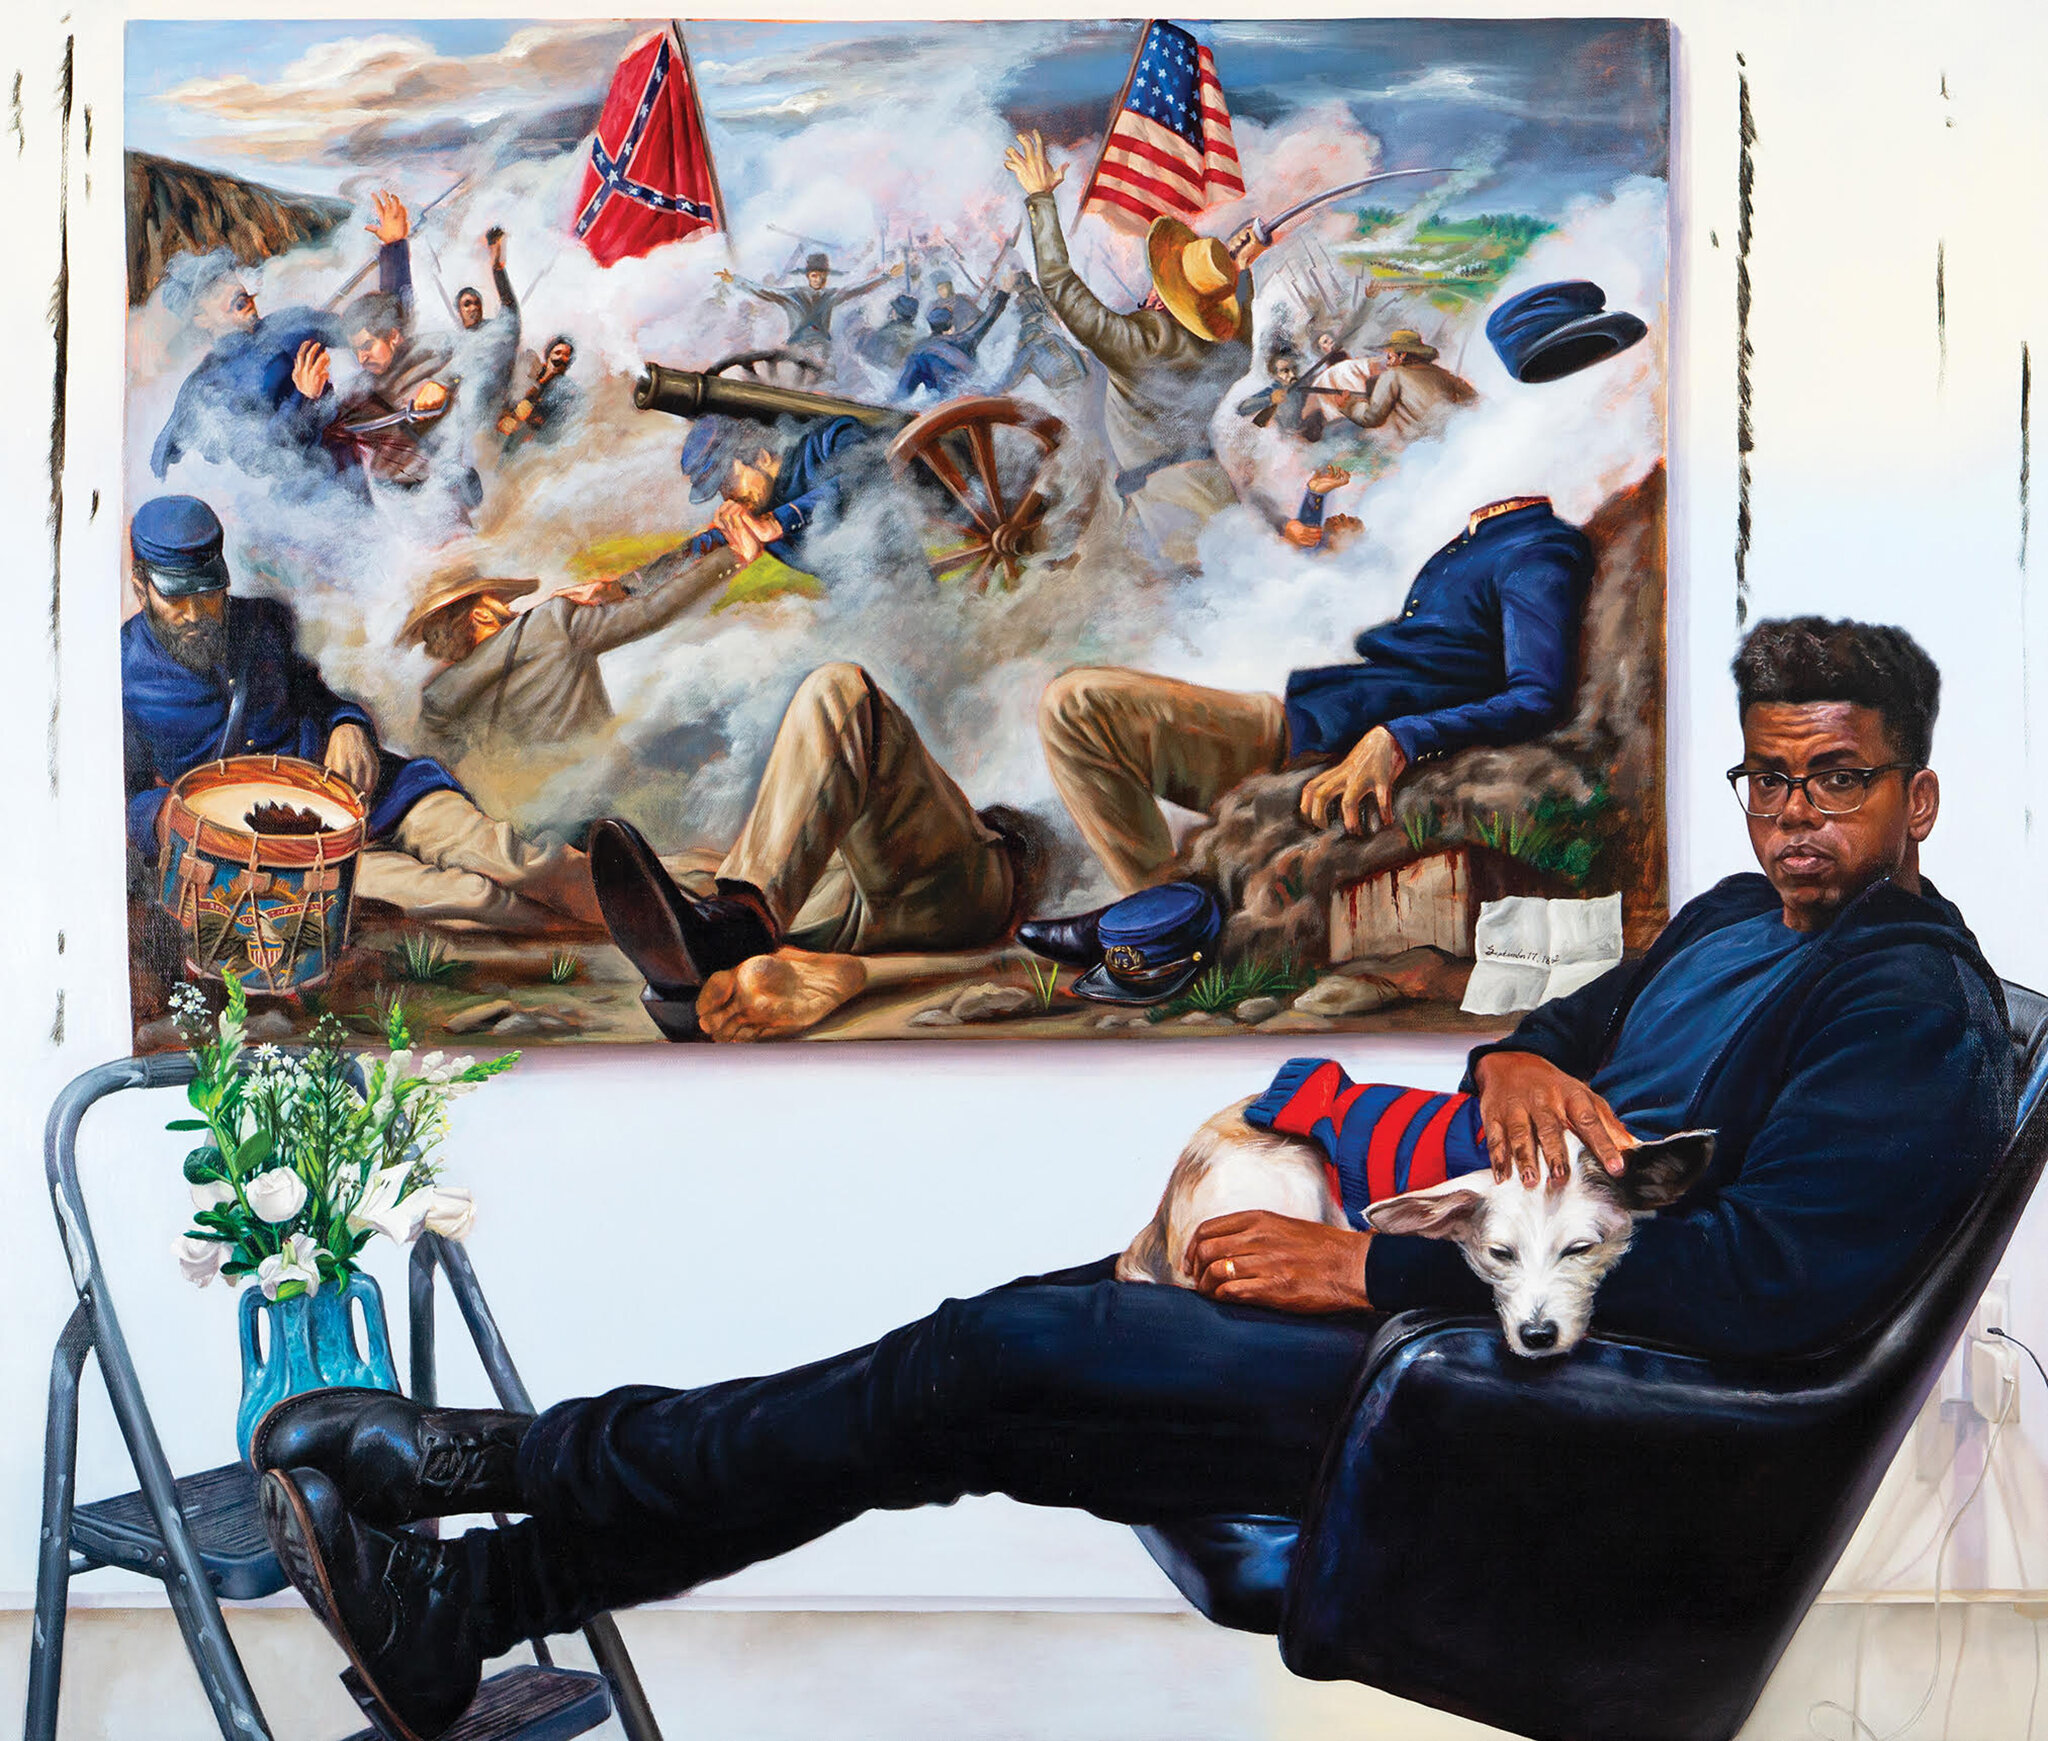 Mario Moore, During and After the Battle, 2020, oil on linen, LSUMOA 2021.2, Purchased with funds from Winifred and Kevin Reilly